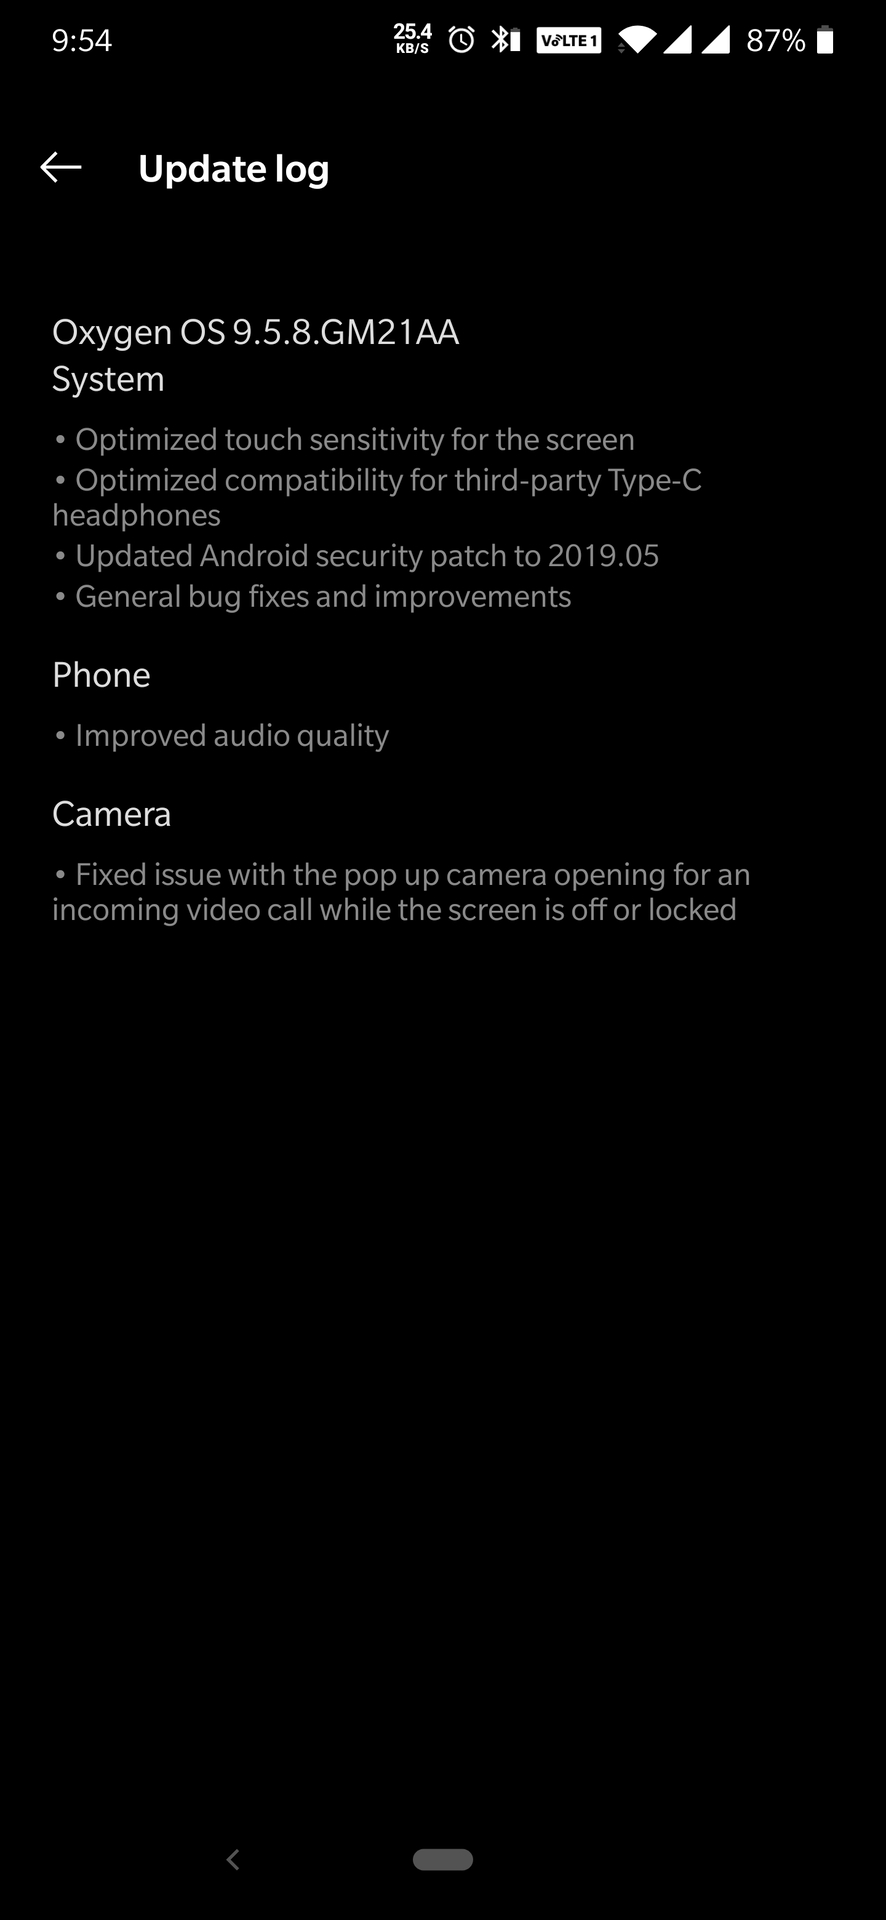 Screenshot of the OnePlus 7 Pro's OxygenOS 9.5.8 update